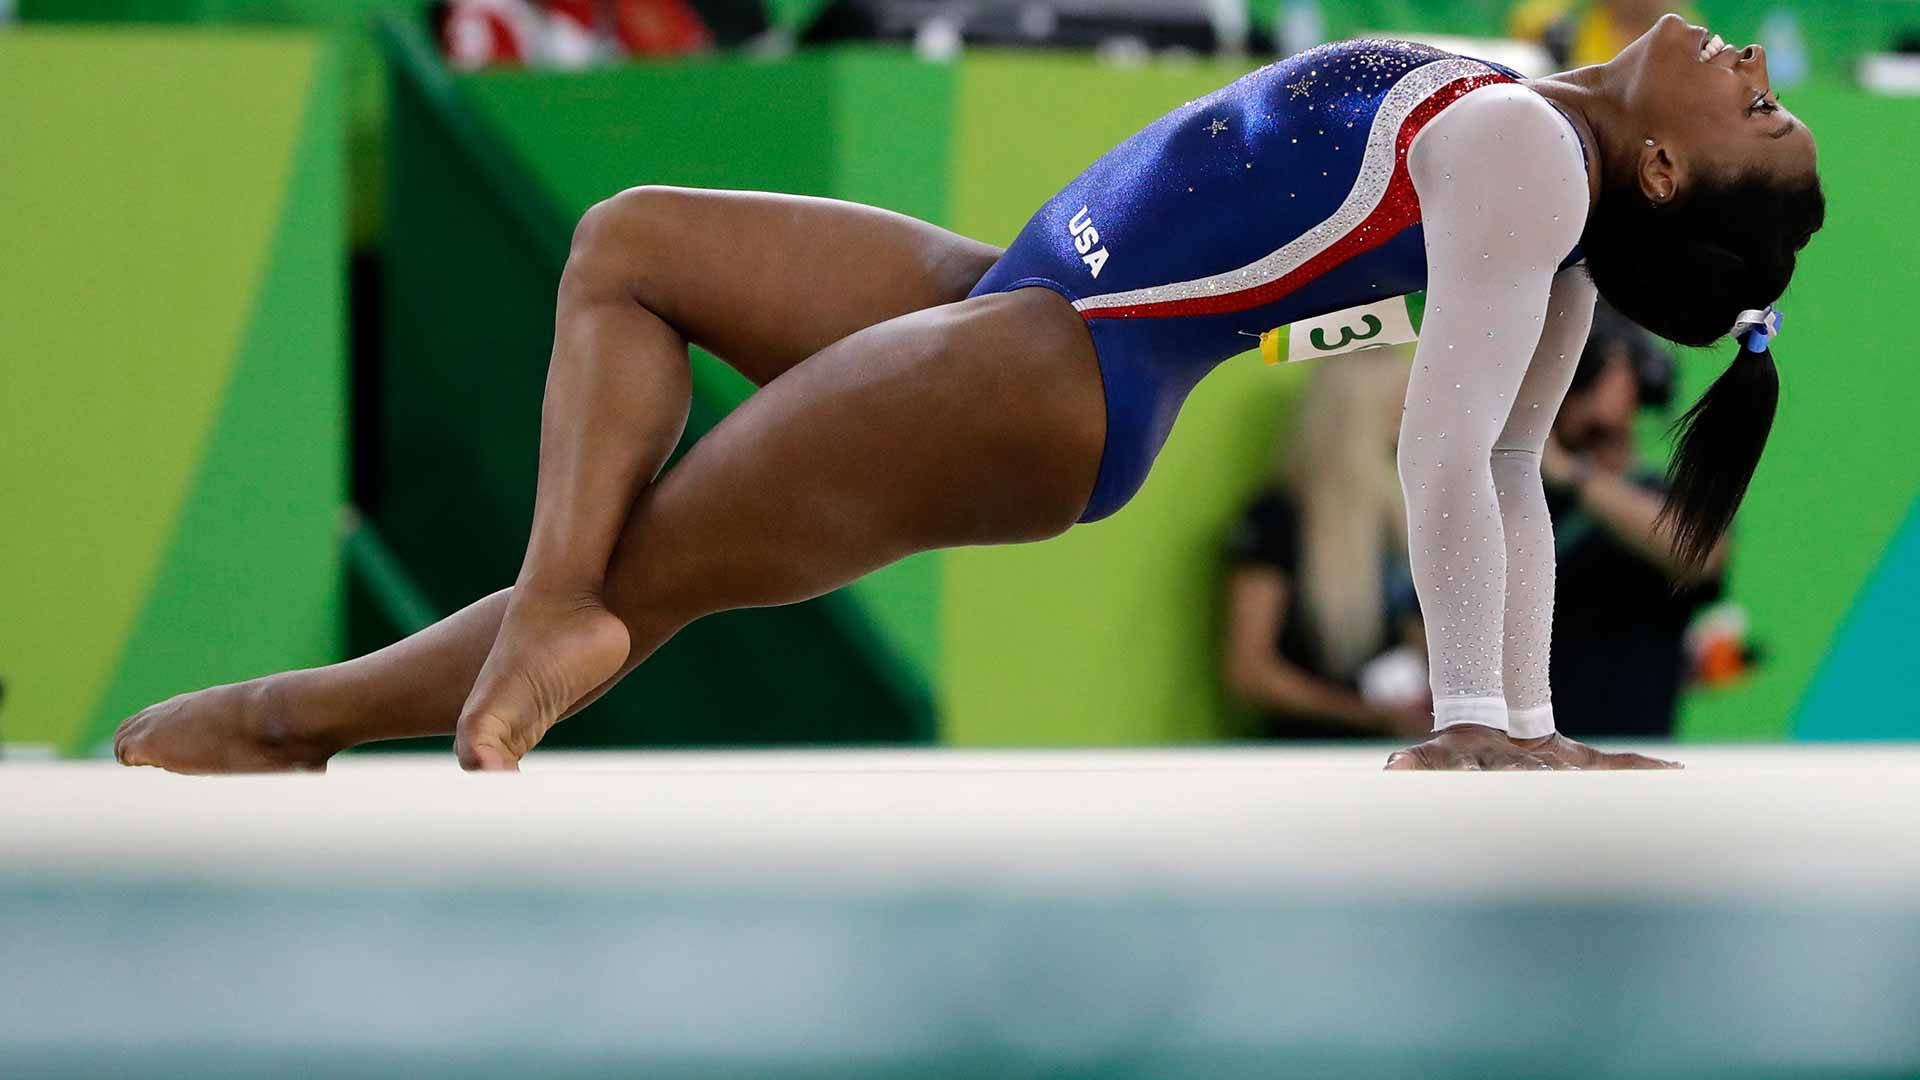 Olympic Gold Medalist Simone Biles At The 2017 World Championships. Wallpaper